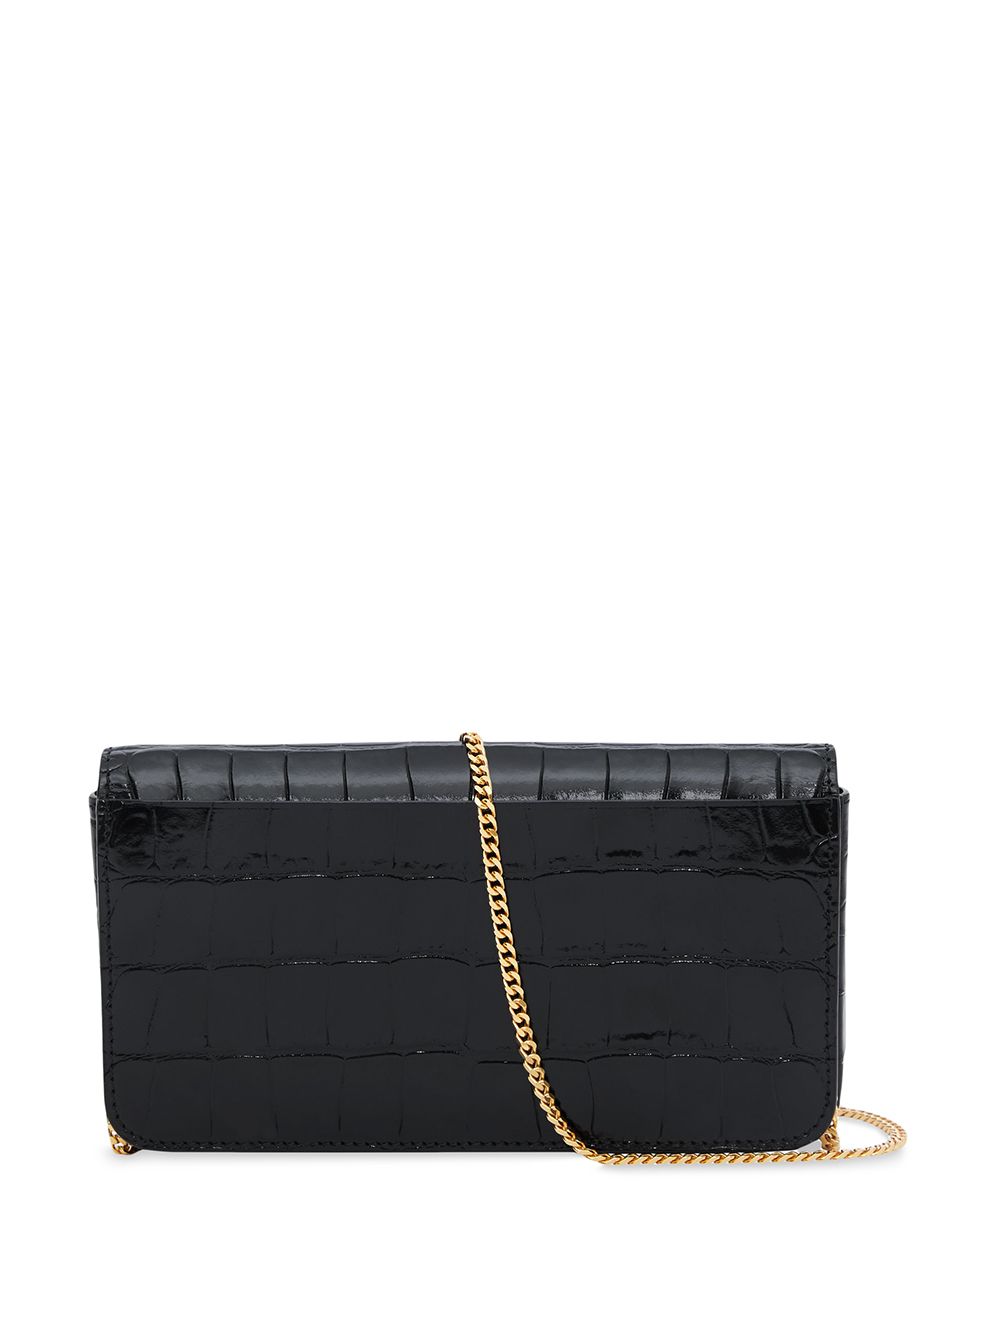 Burberry Embossed Wallet With Detachable Chain Strap - Farfetch